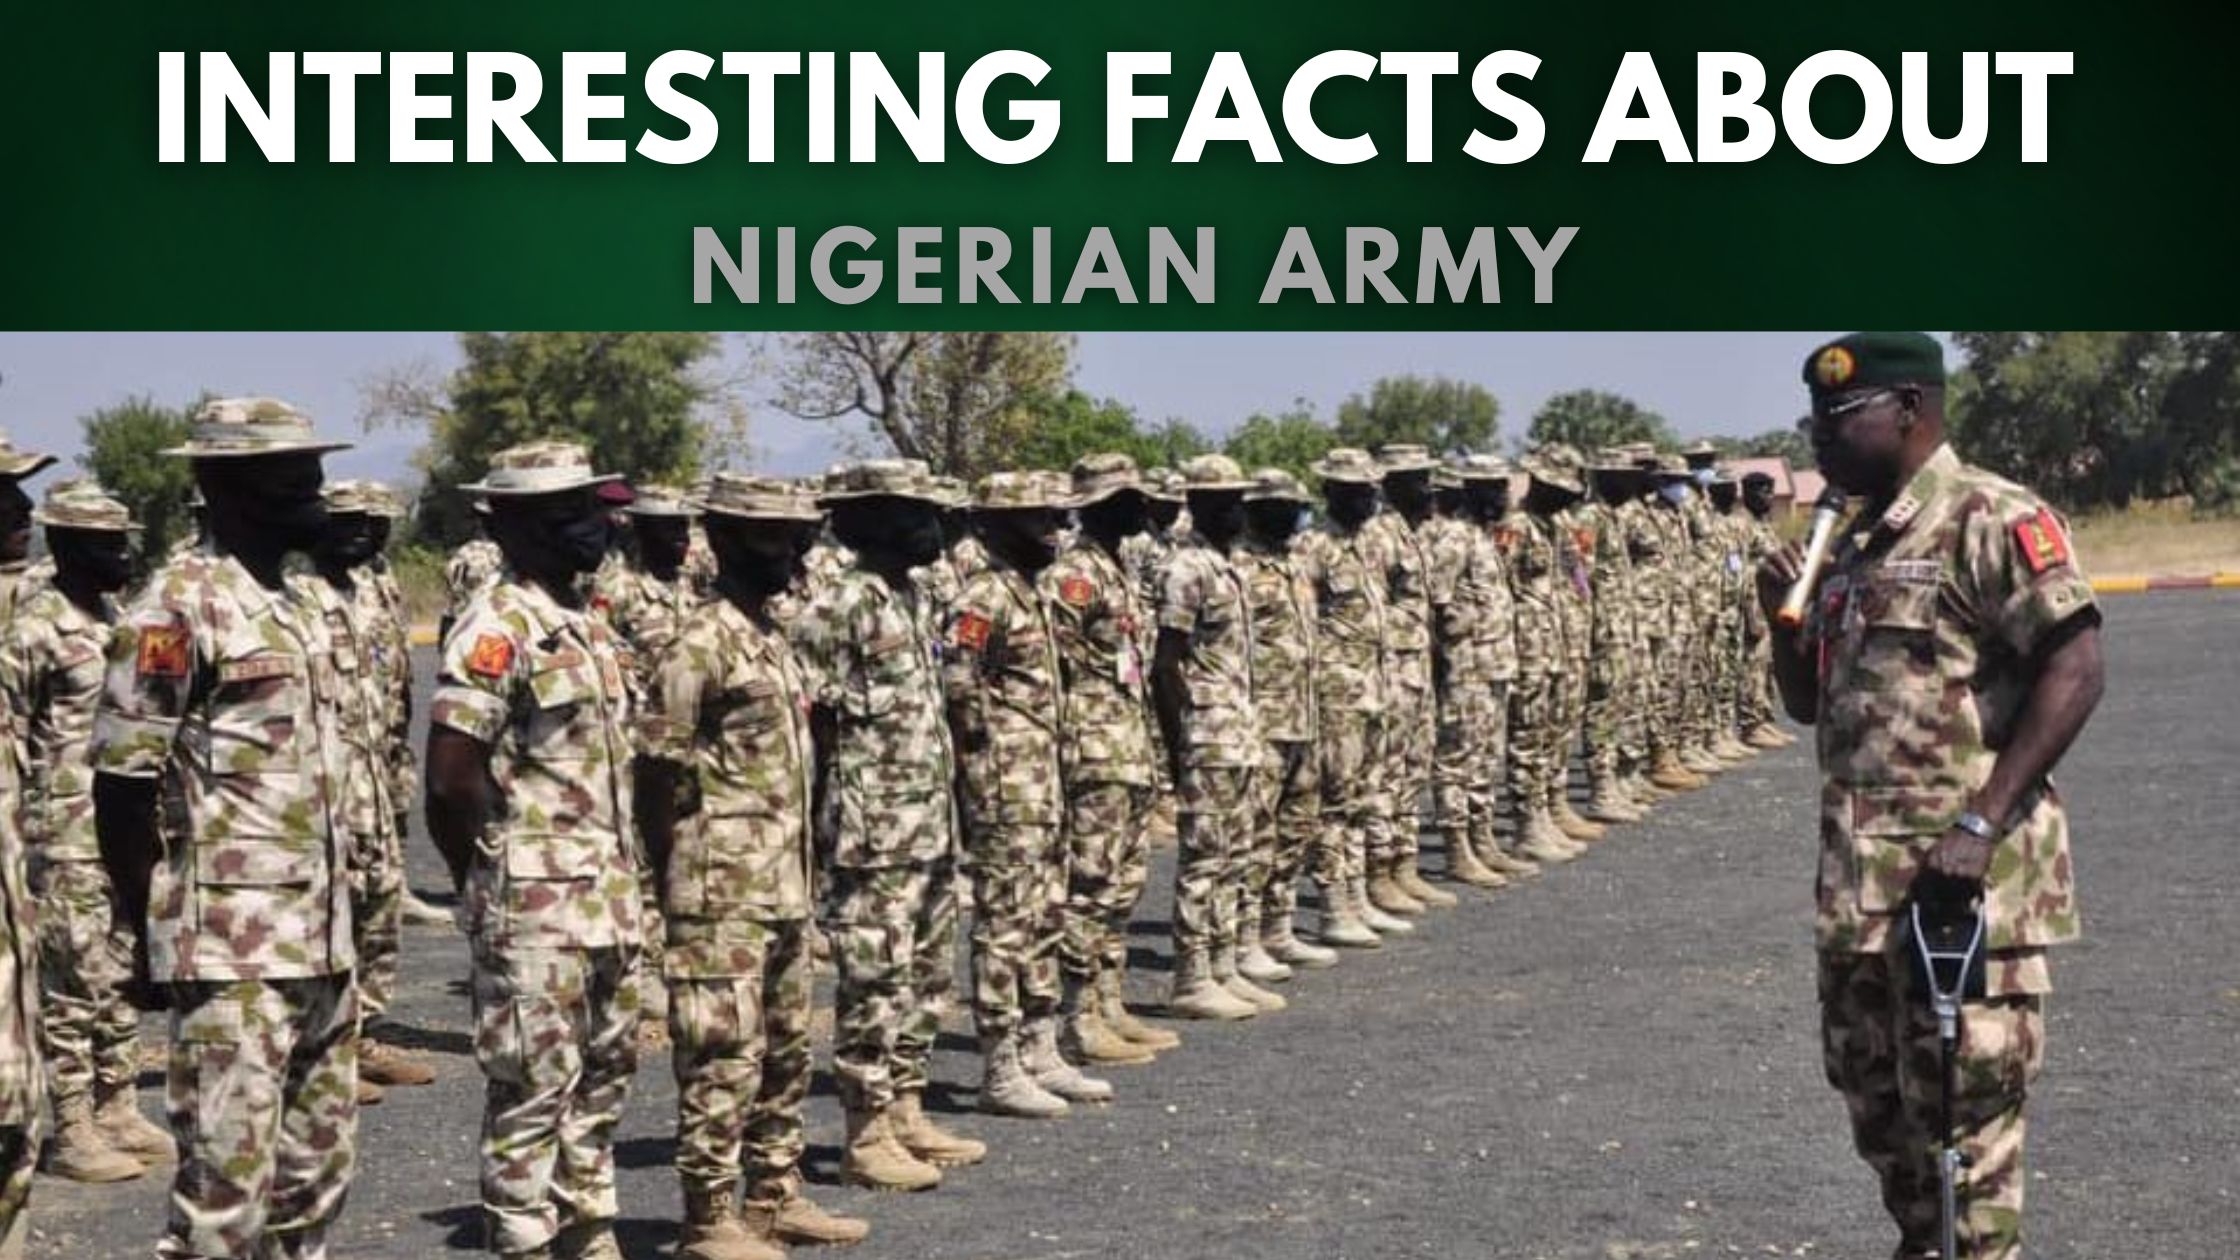 Interesting Facts about Nigerian Army